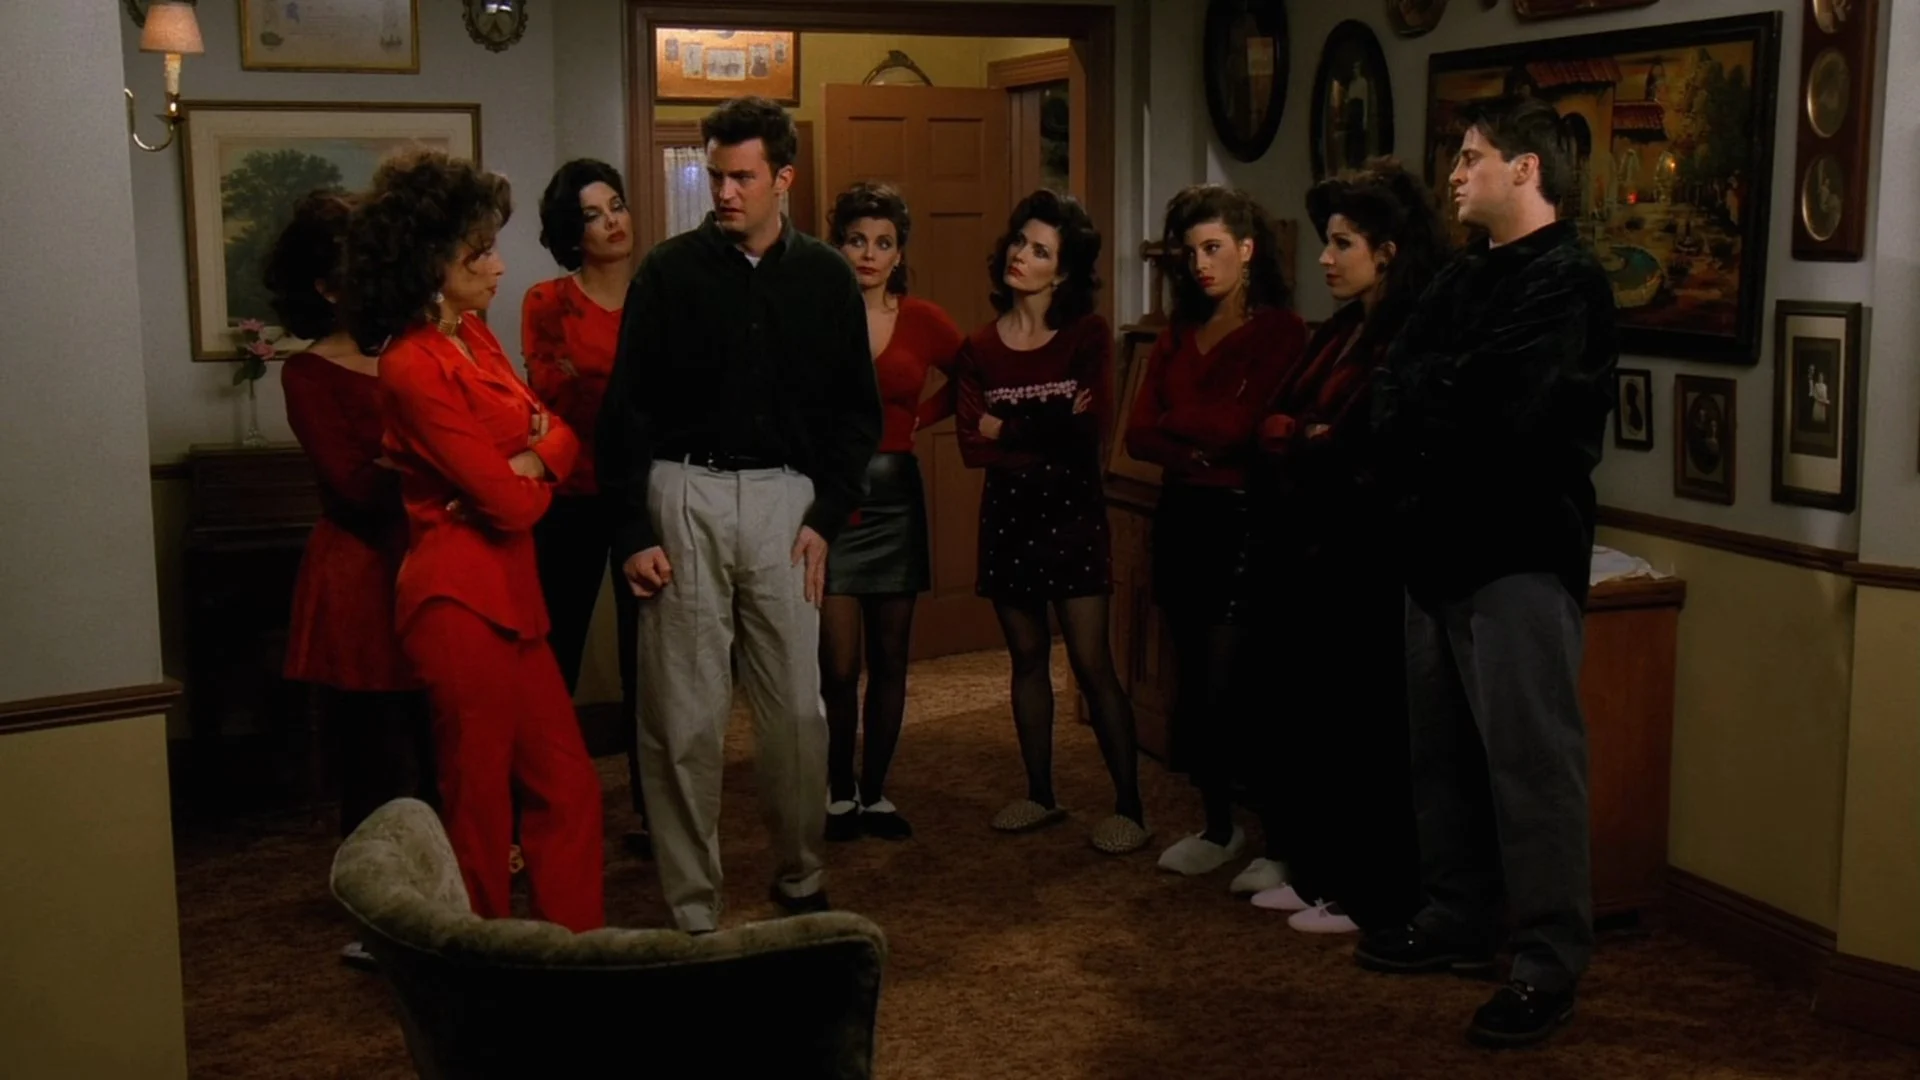 Second Look: Friends Season 3 Episode 11 – “The One Where Chandler Can’t Remember Which Sister”